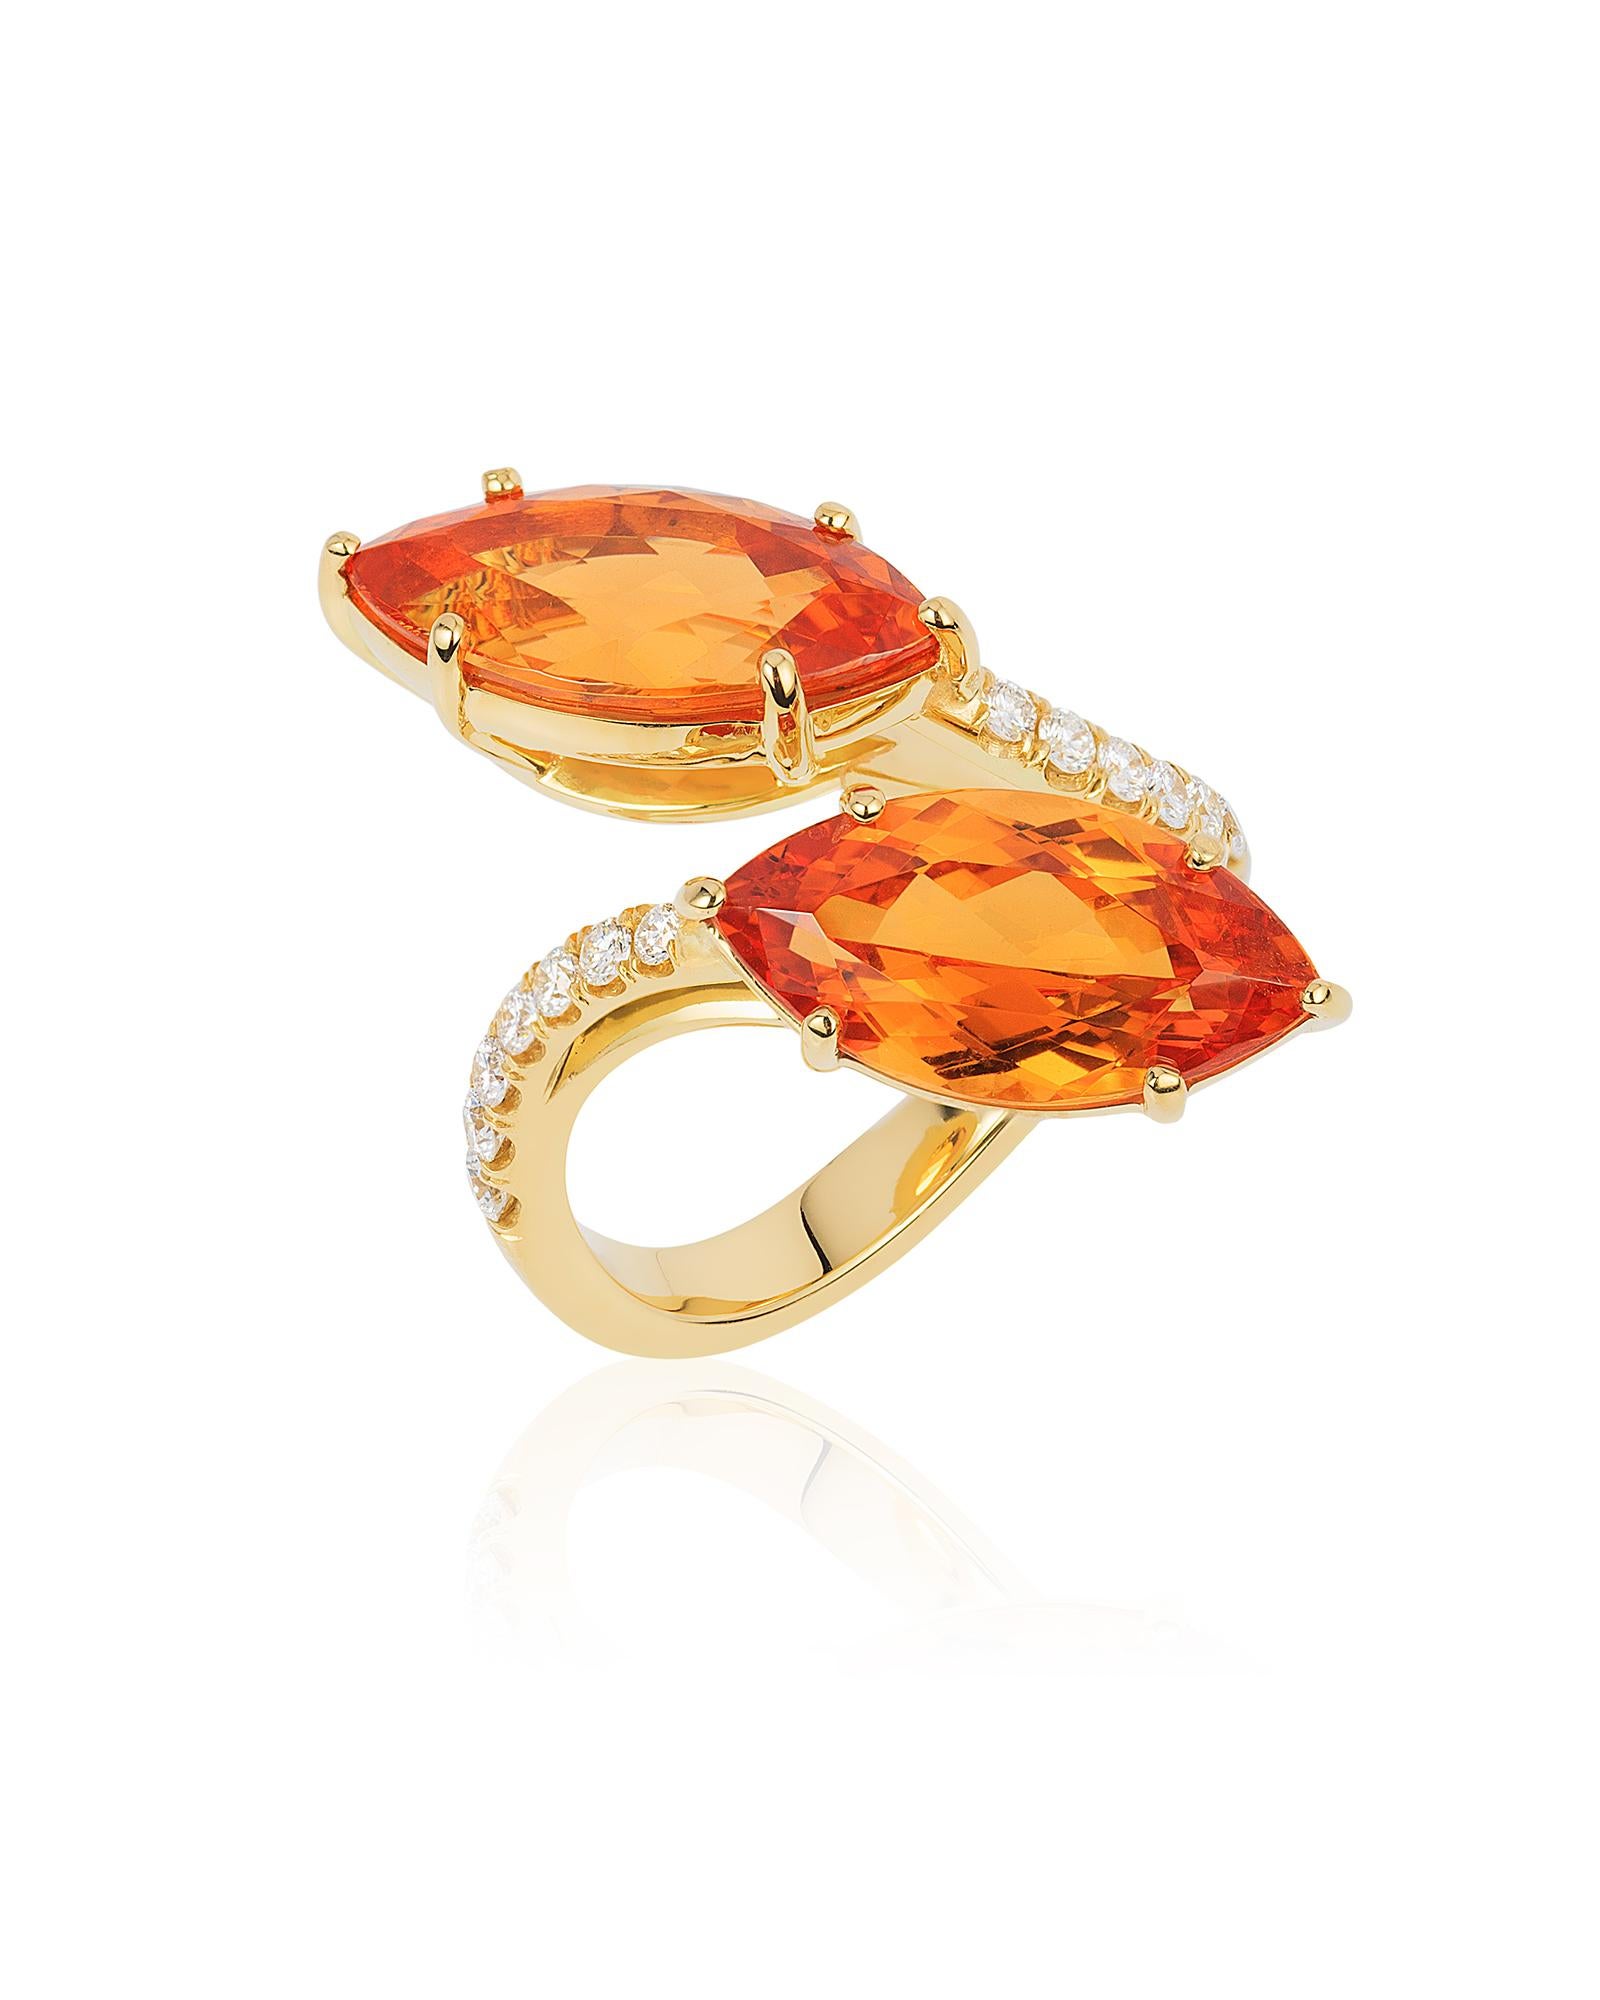 Mandarin Garnet Marquise Twin Ring in 18K Yellow Gold with Diamonds, from 'G-One' Collection. Our G-One Collection undeniably carries the most special pieces of Goshwara. The sought-after, one-of-a-kind pieces speak to each unique personality of the